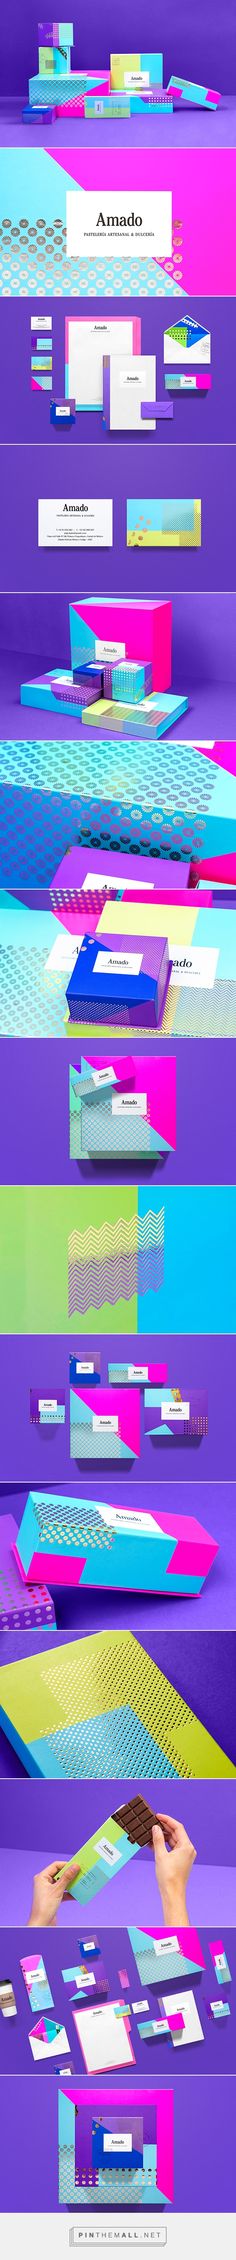 This is a modern, bright and geometric color scheme that is maintained throughout the various pieces in the collection (letters, envelopes, business cards, etc.) The use of metallic pattern adds a nice touch as well.